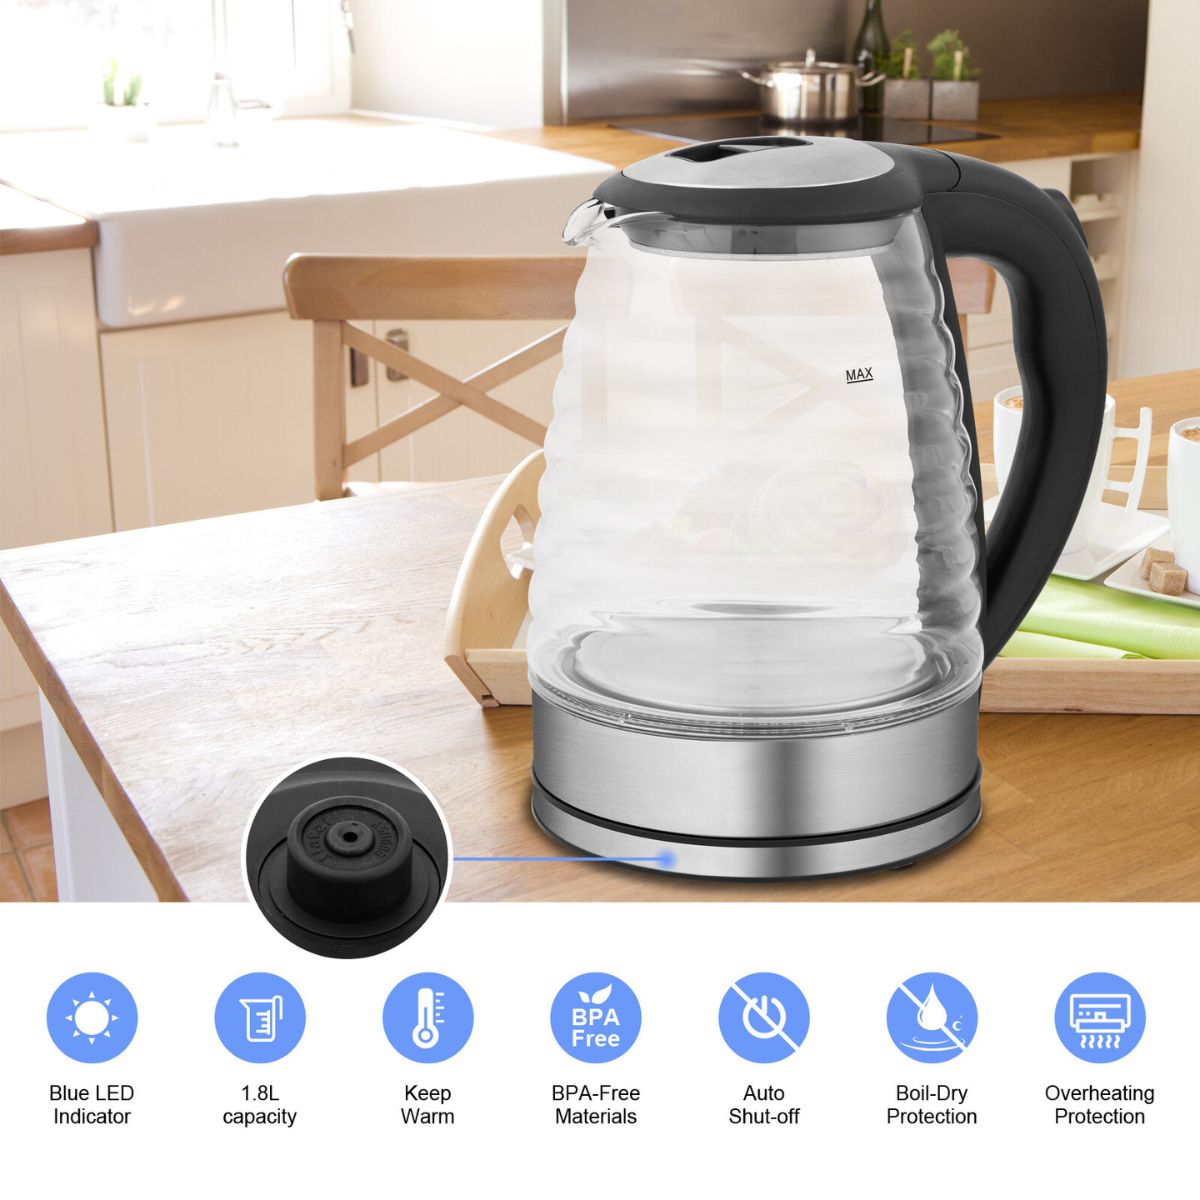 1.8L Electric Kettle Stainless Steel High Quality Borosilicate Glass Blue Light, 220V 2000W - TovaHaus